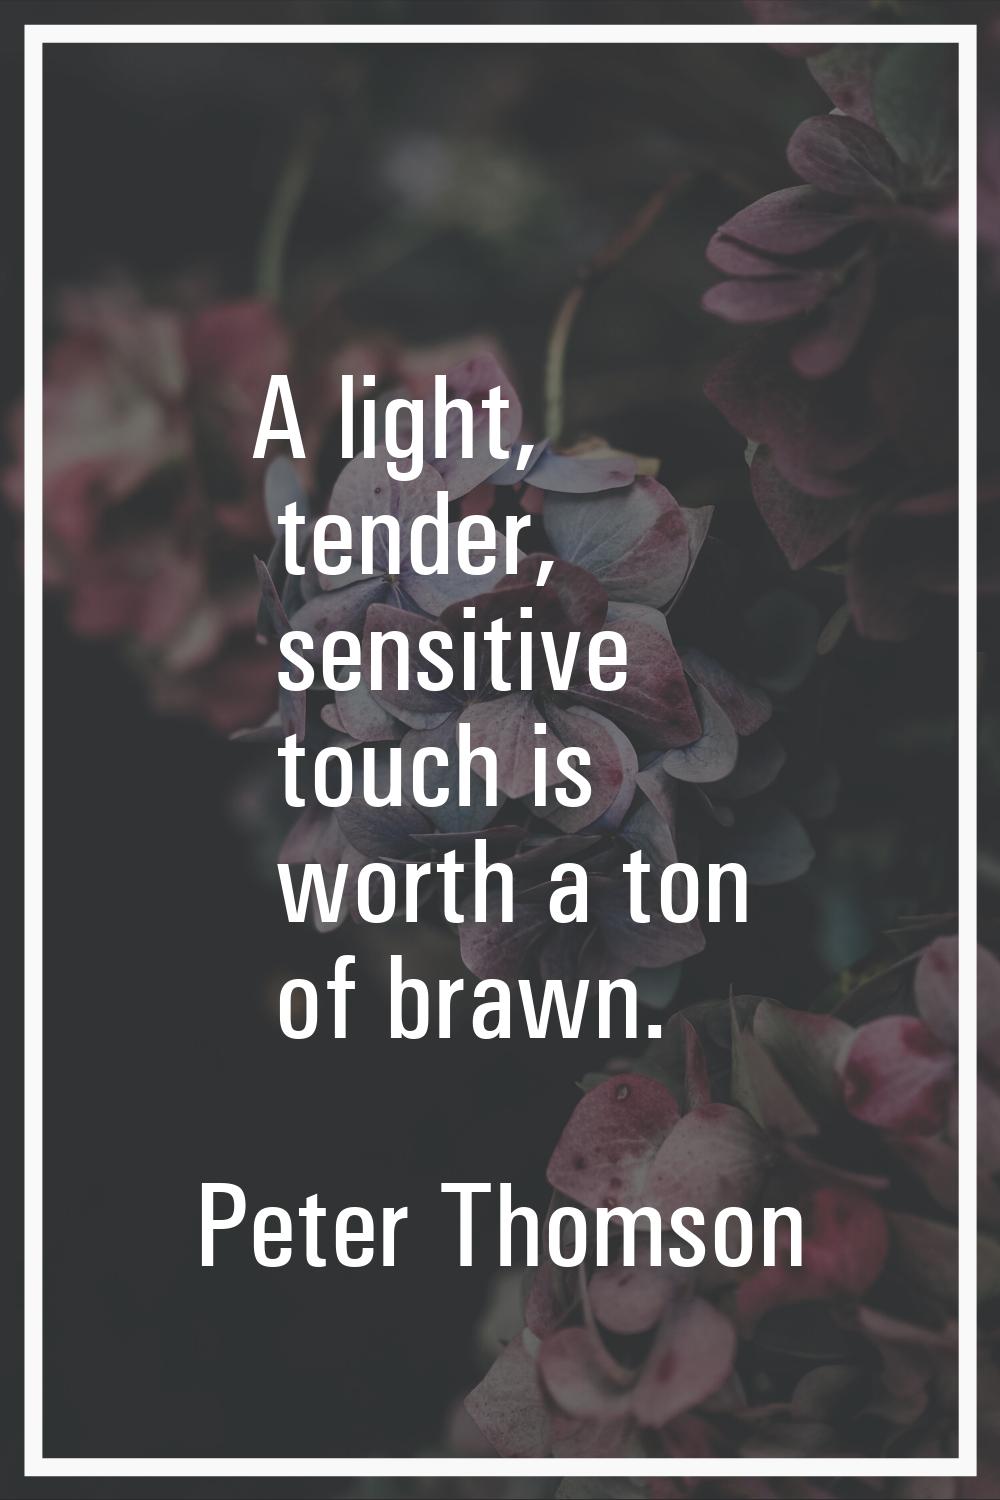 A light, tender, sensitive touch is worth a ton of brawn.